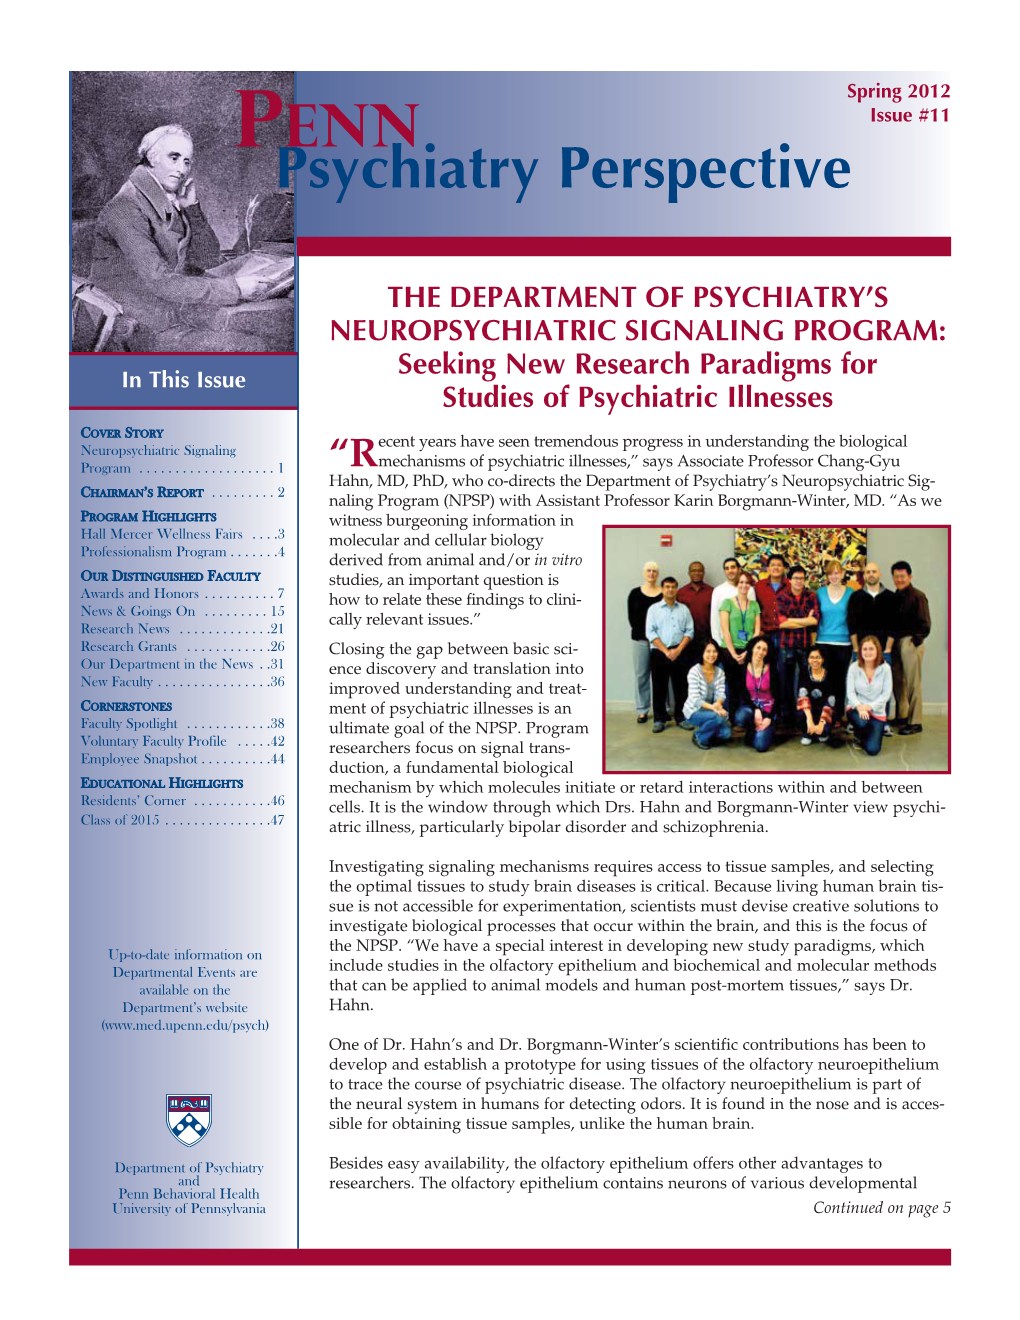 PENN Issue #11 Psychiatry Perspective